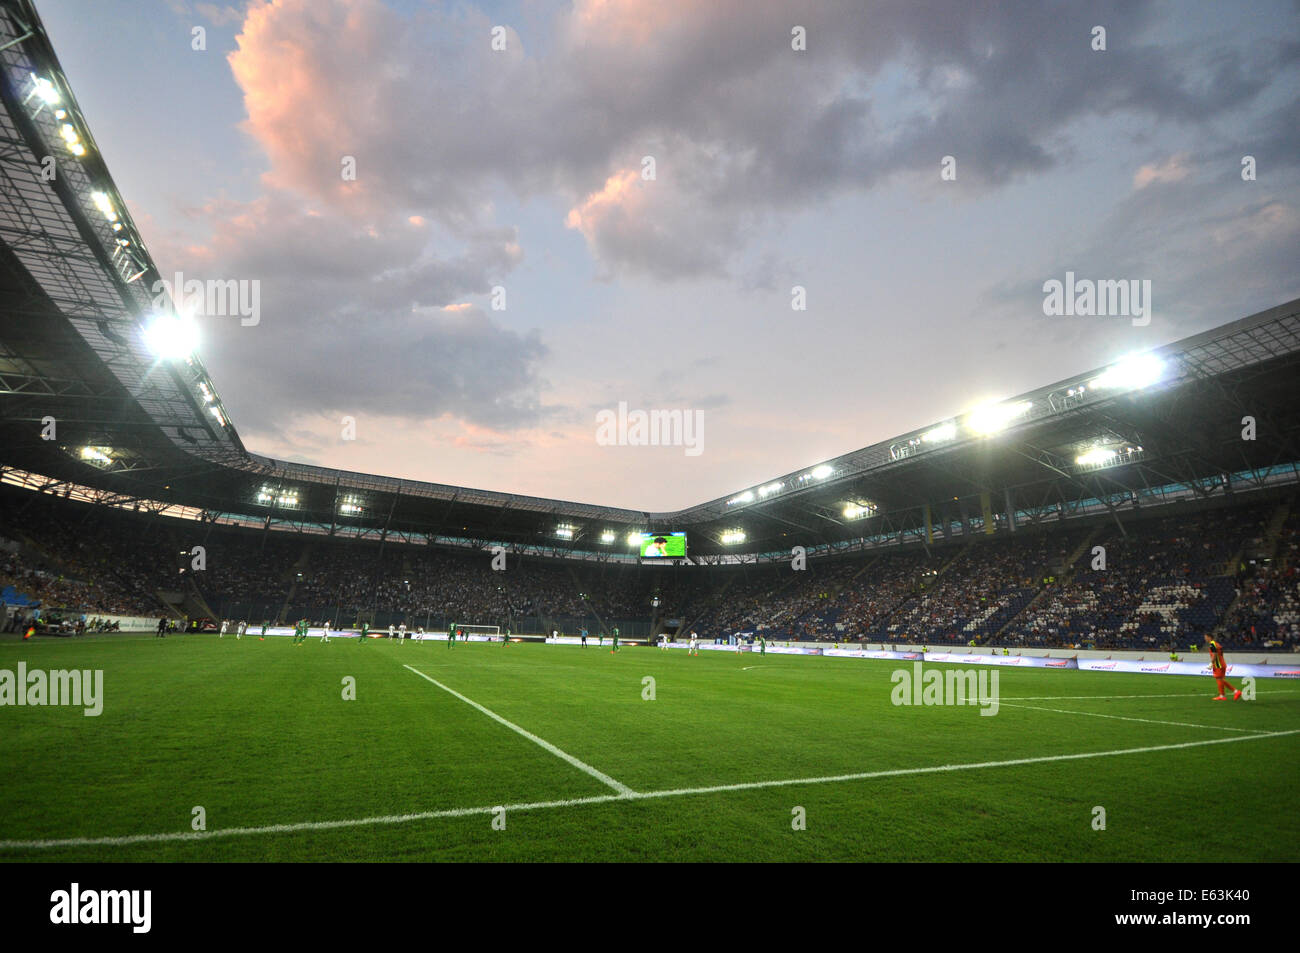 View on Dnipro-Arena during the match between FC Dnipro and FC Karpaty at Stadium Dnipro-Arena, Ukraine Stock Photo